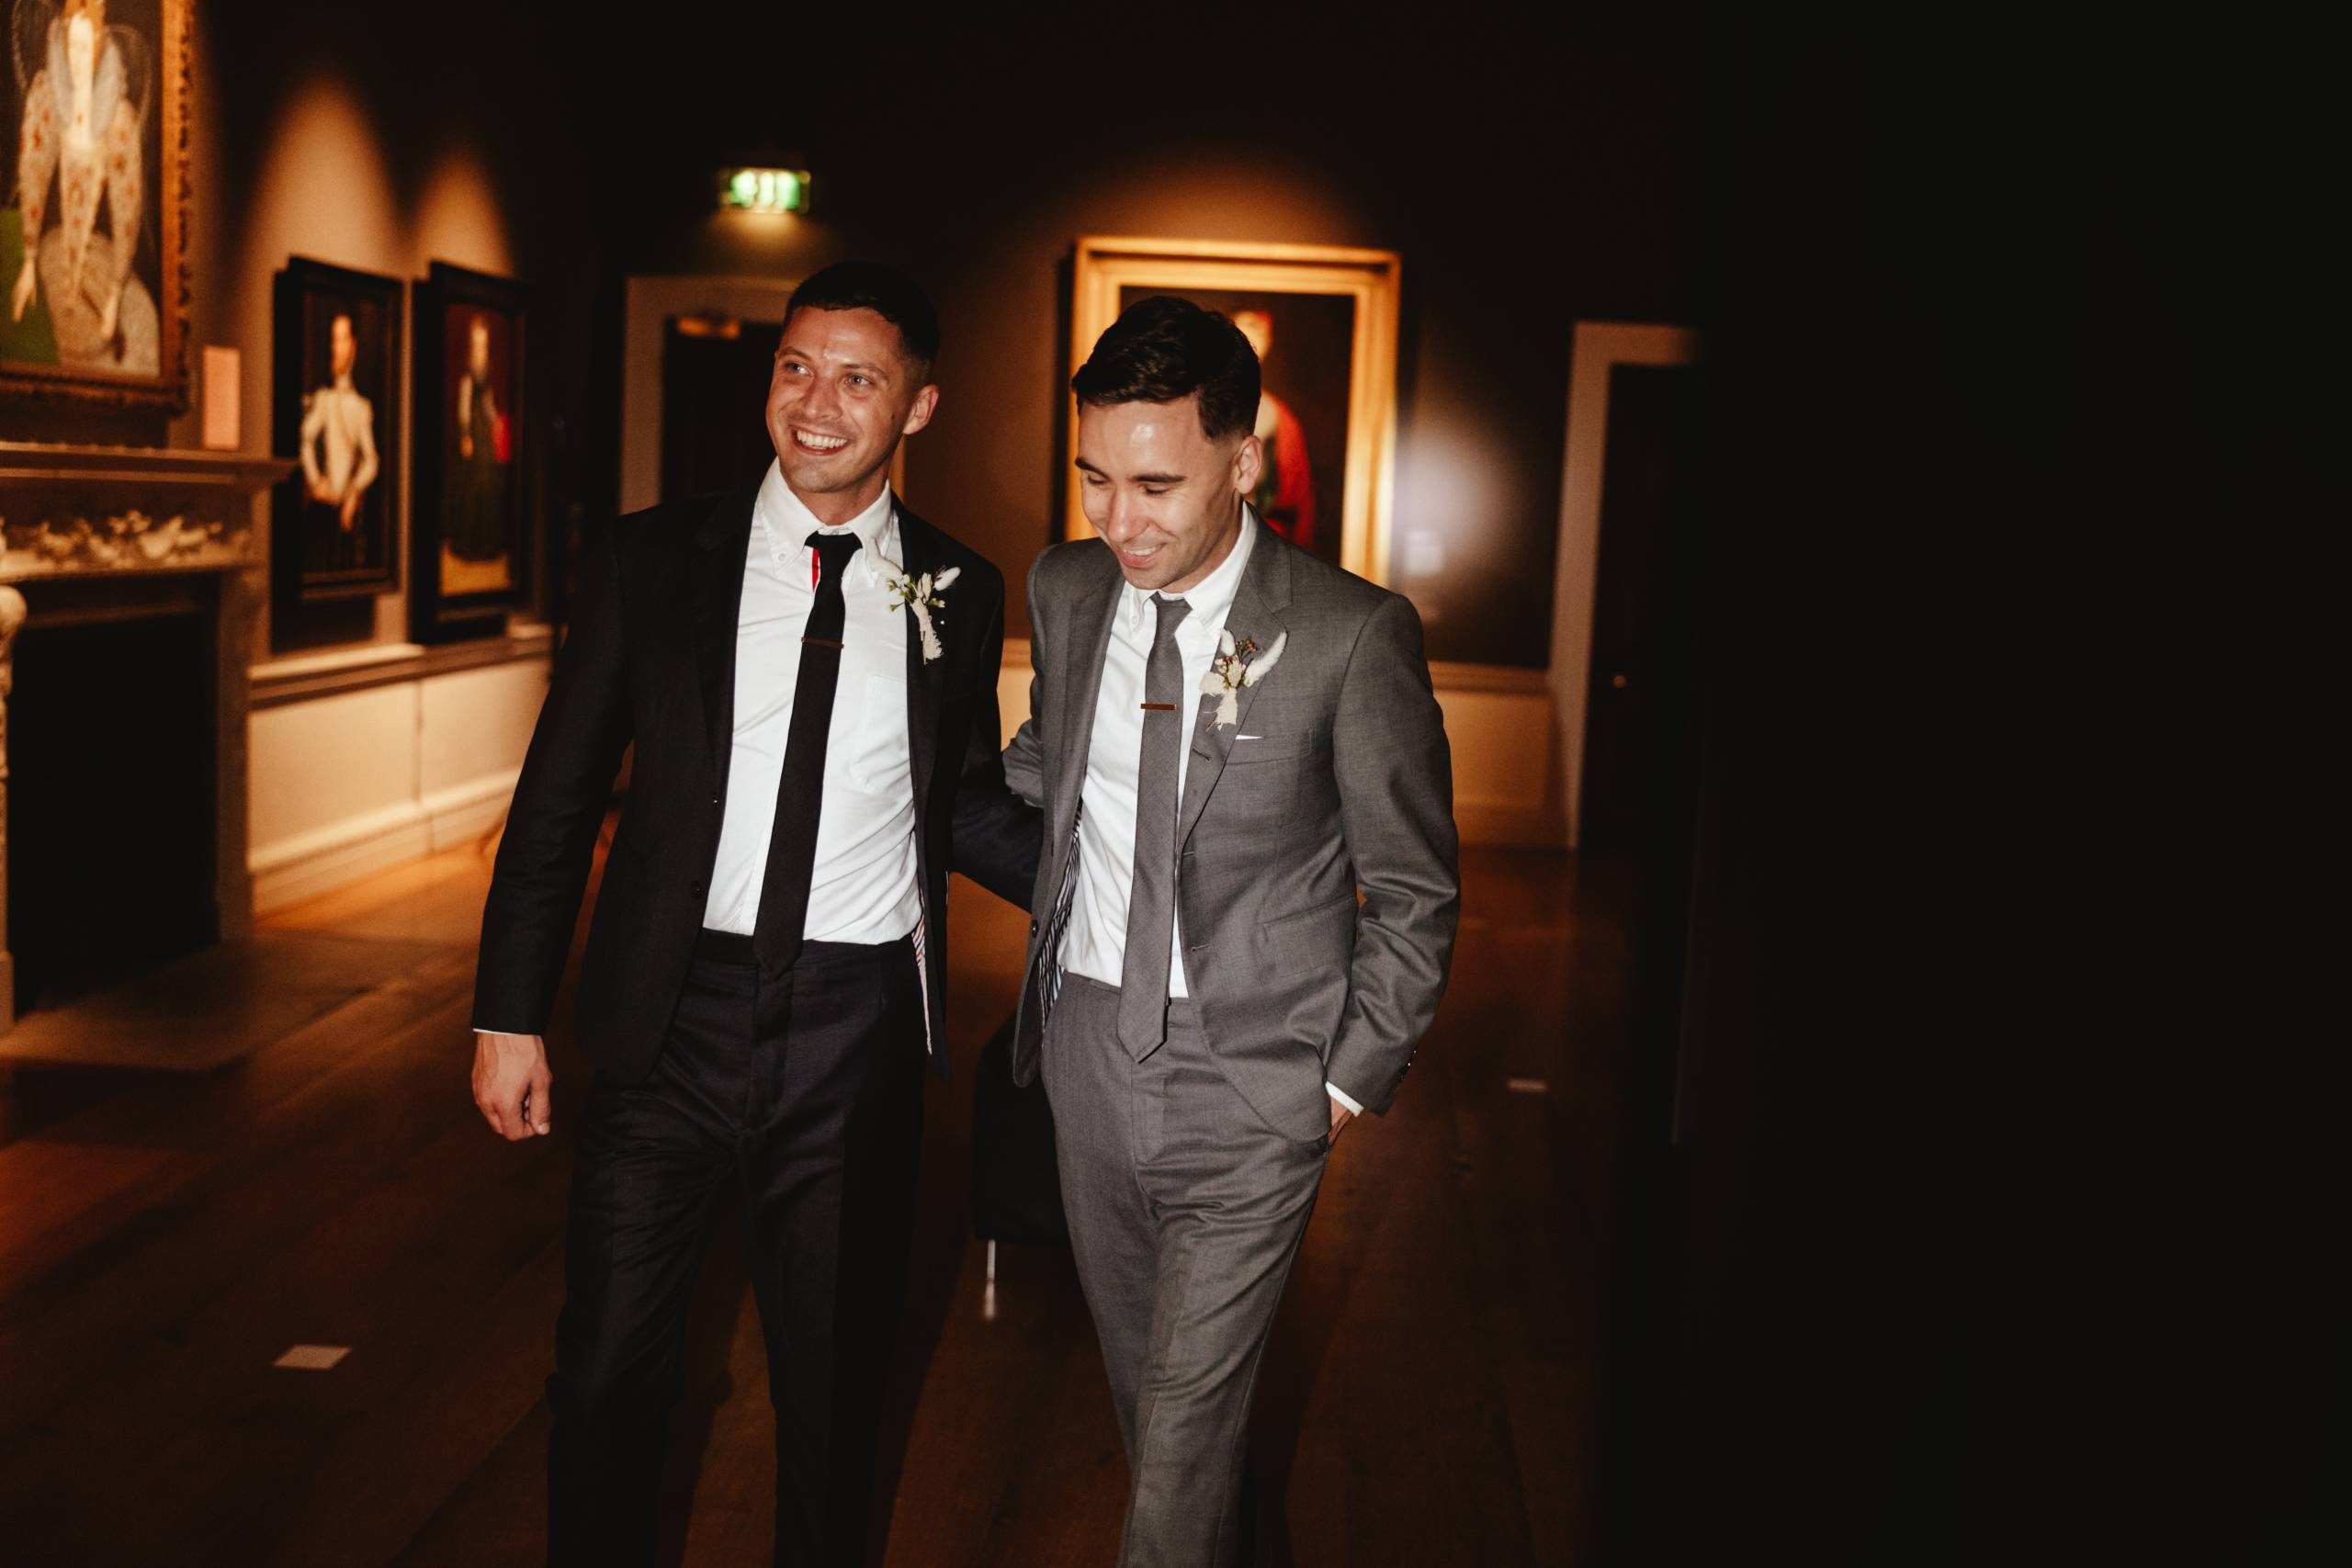 The image shows two grooms, smiling and standing together in what appears to be an art gallery. One man is wearing a black suit with a white shirt and black tie, while the other is wearing a grey suit. They both have boutonniere flowers pinned to their lapels, suggesting this is from their wedding celebration. The warm lighting and framed artwork on the walls creates an elegant, intimate ambiance for this joyful moment between the two grooms or partners.